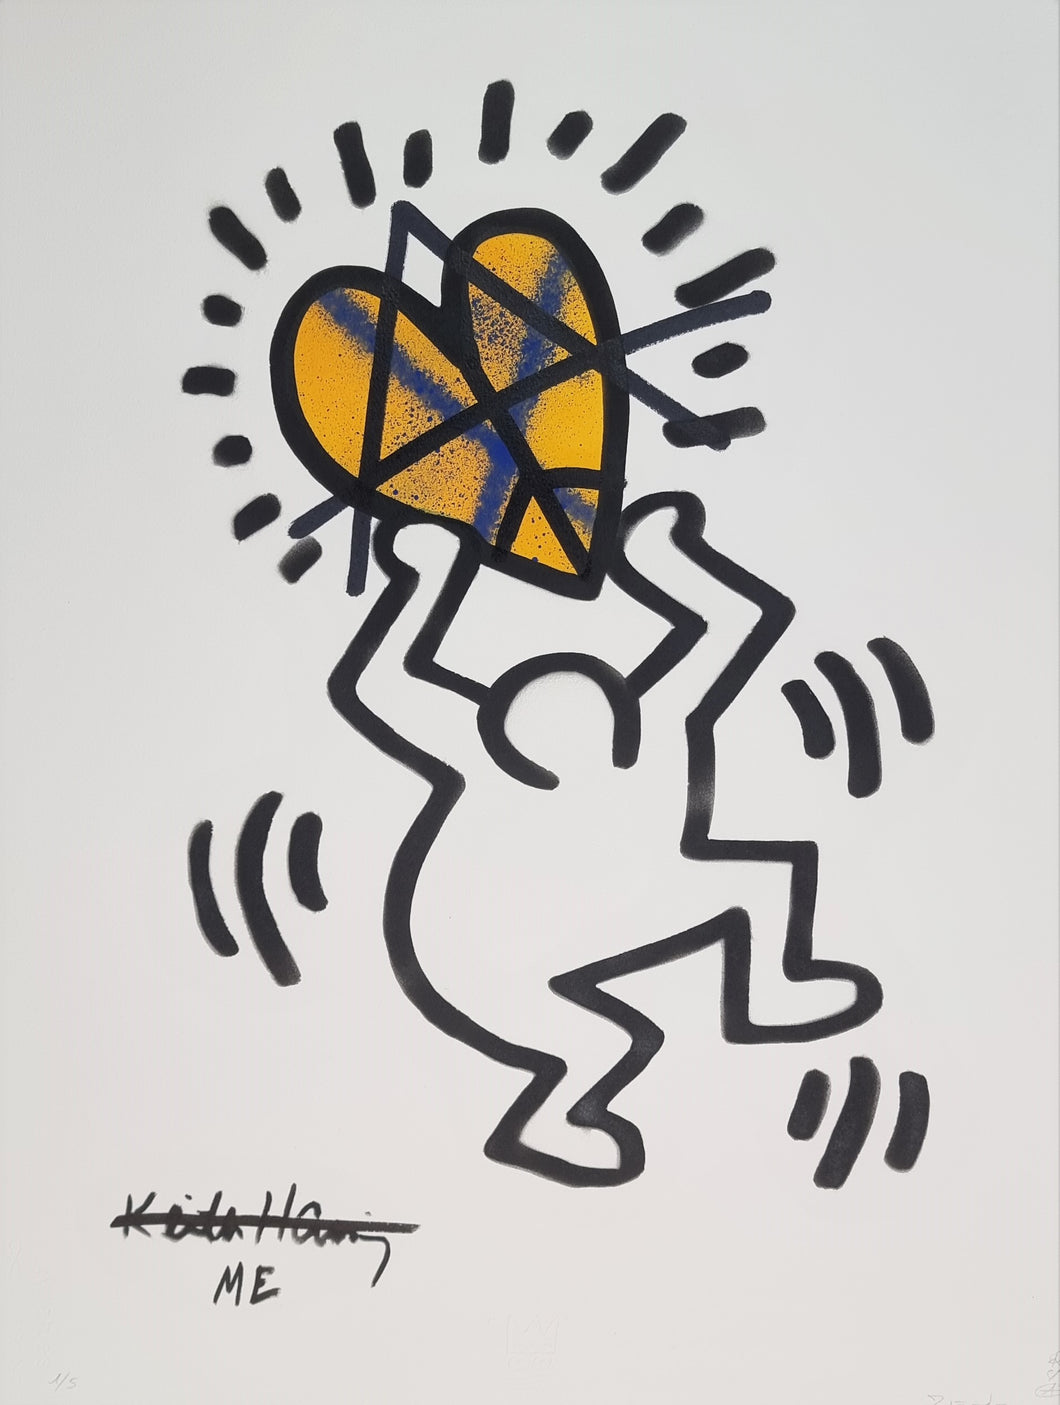 My Kid Just Ruined My Keith Haring II (Yellow/blue) by Ziegler T